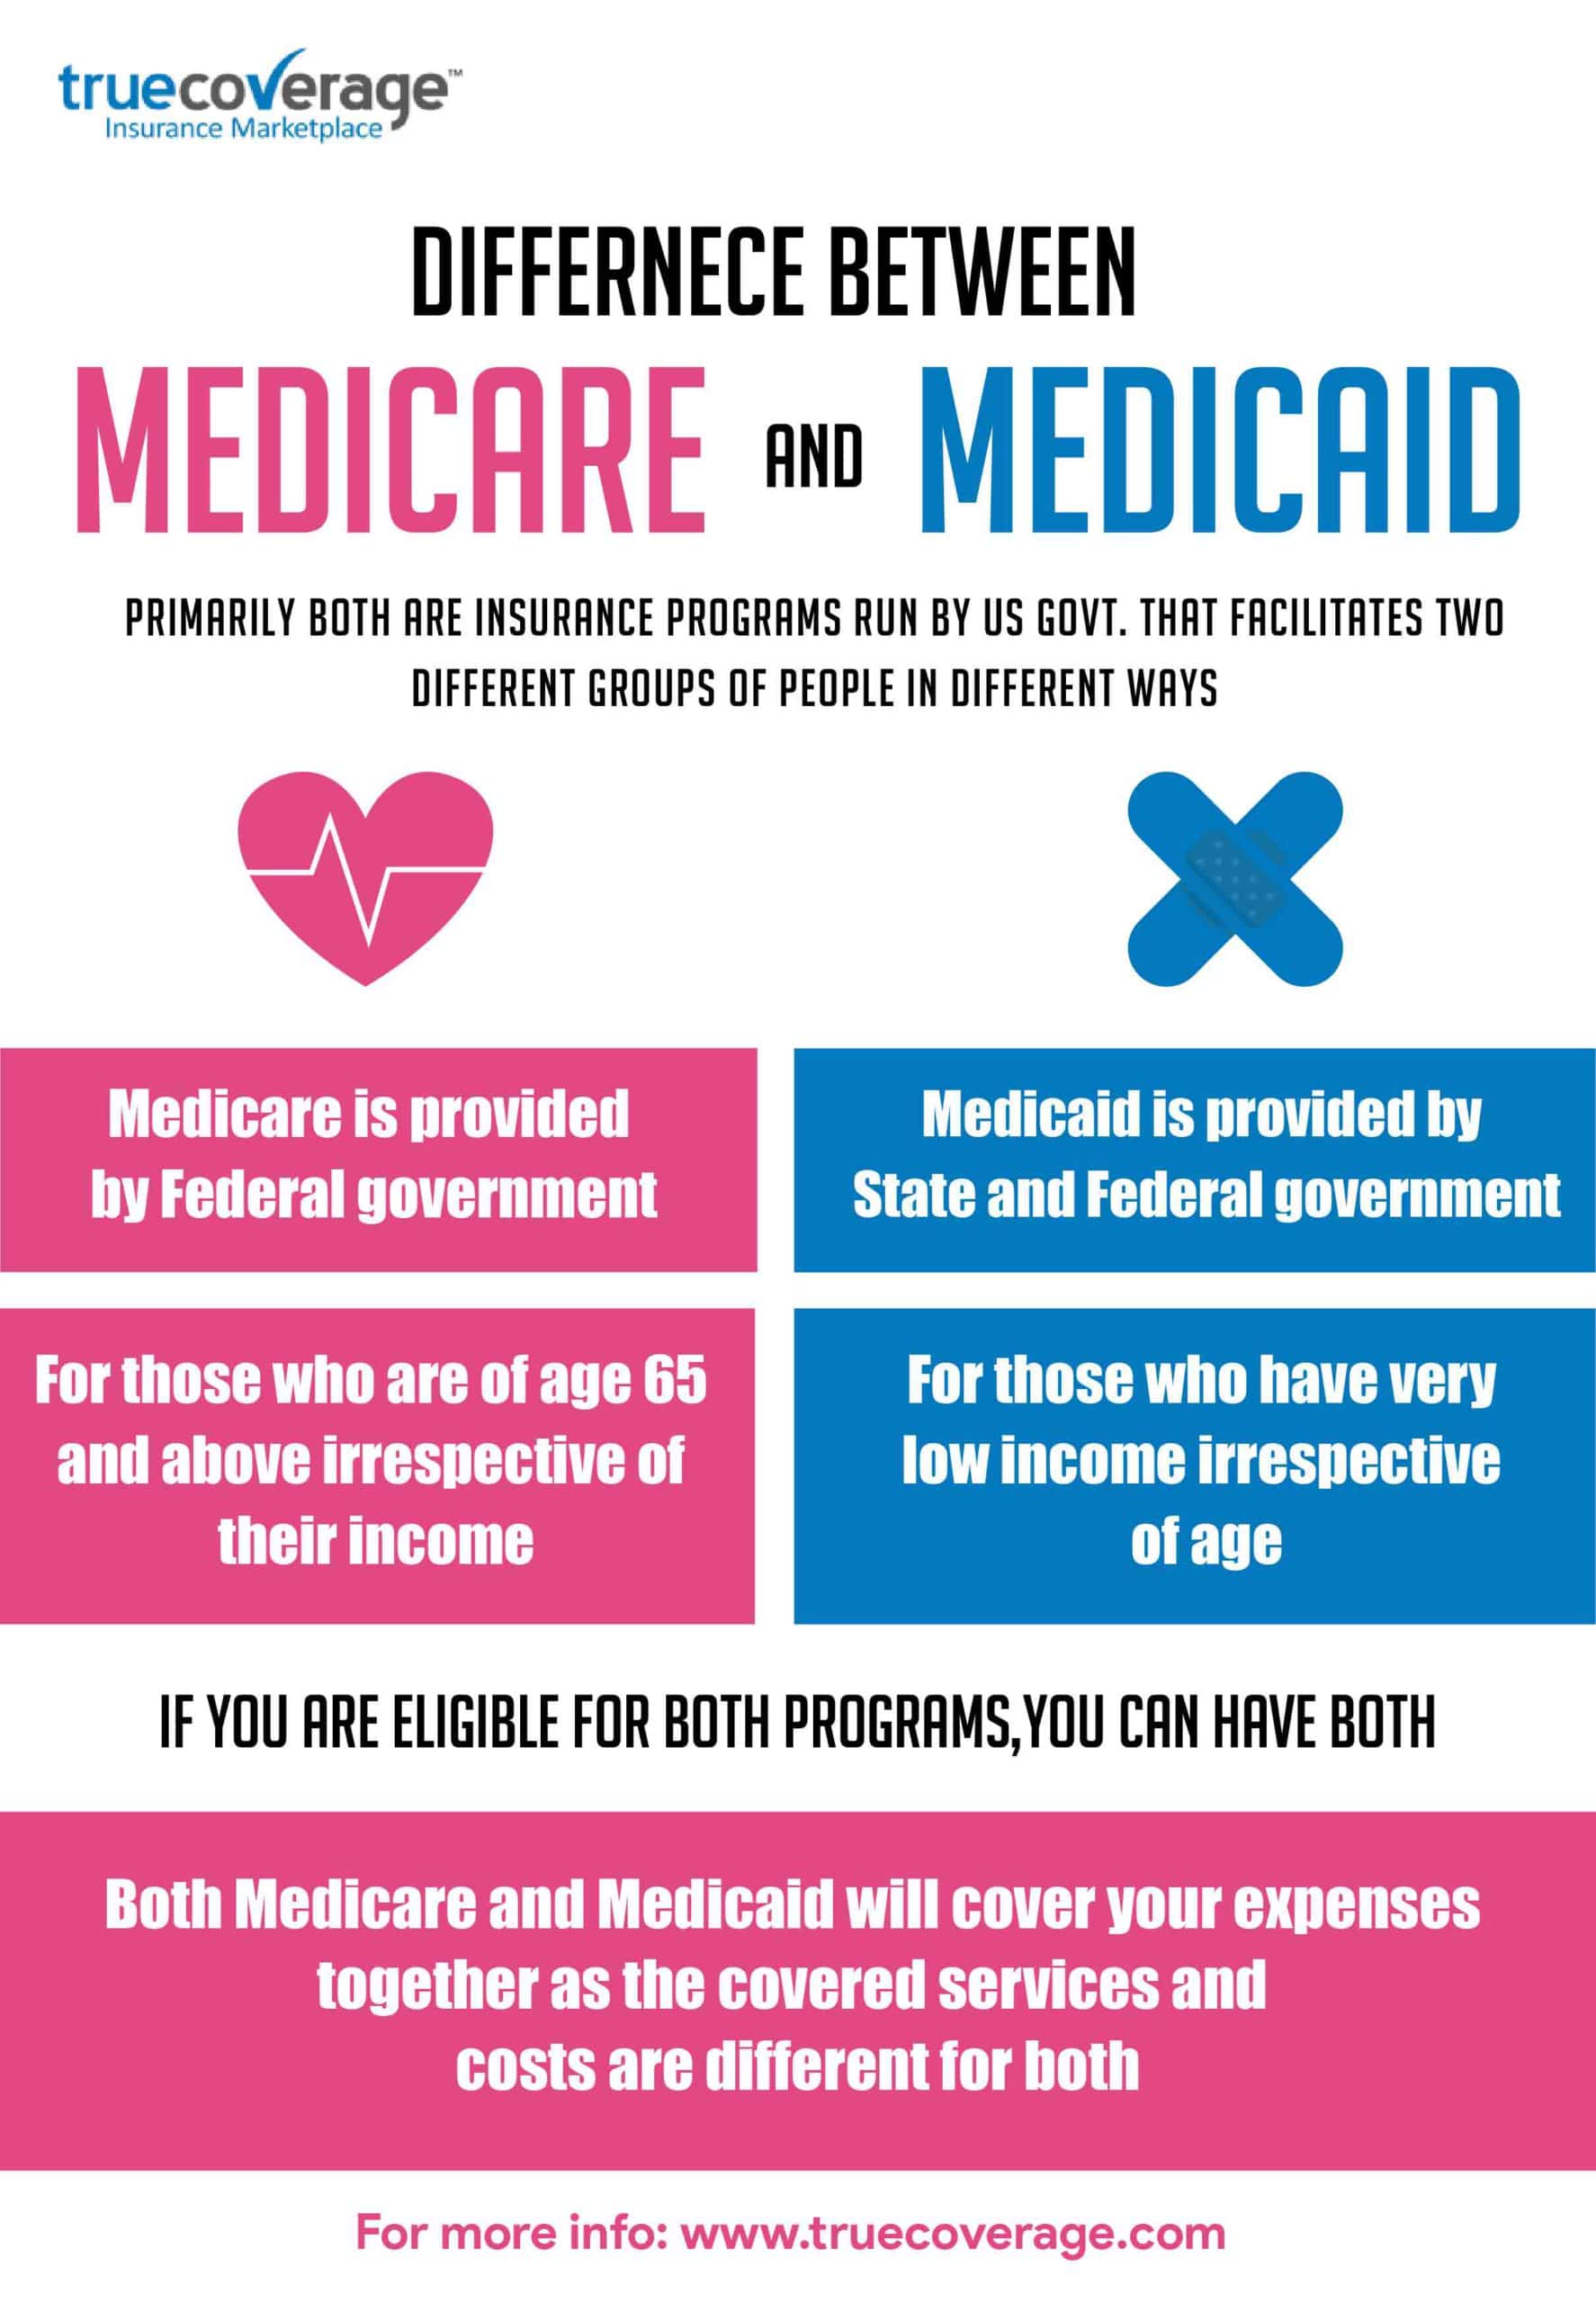 Difference between Medicare and Medicaid